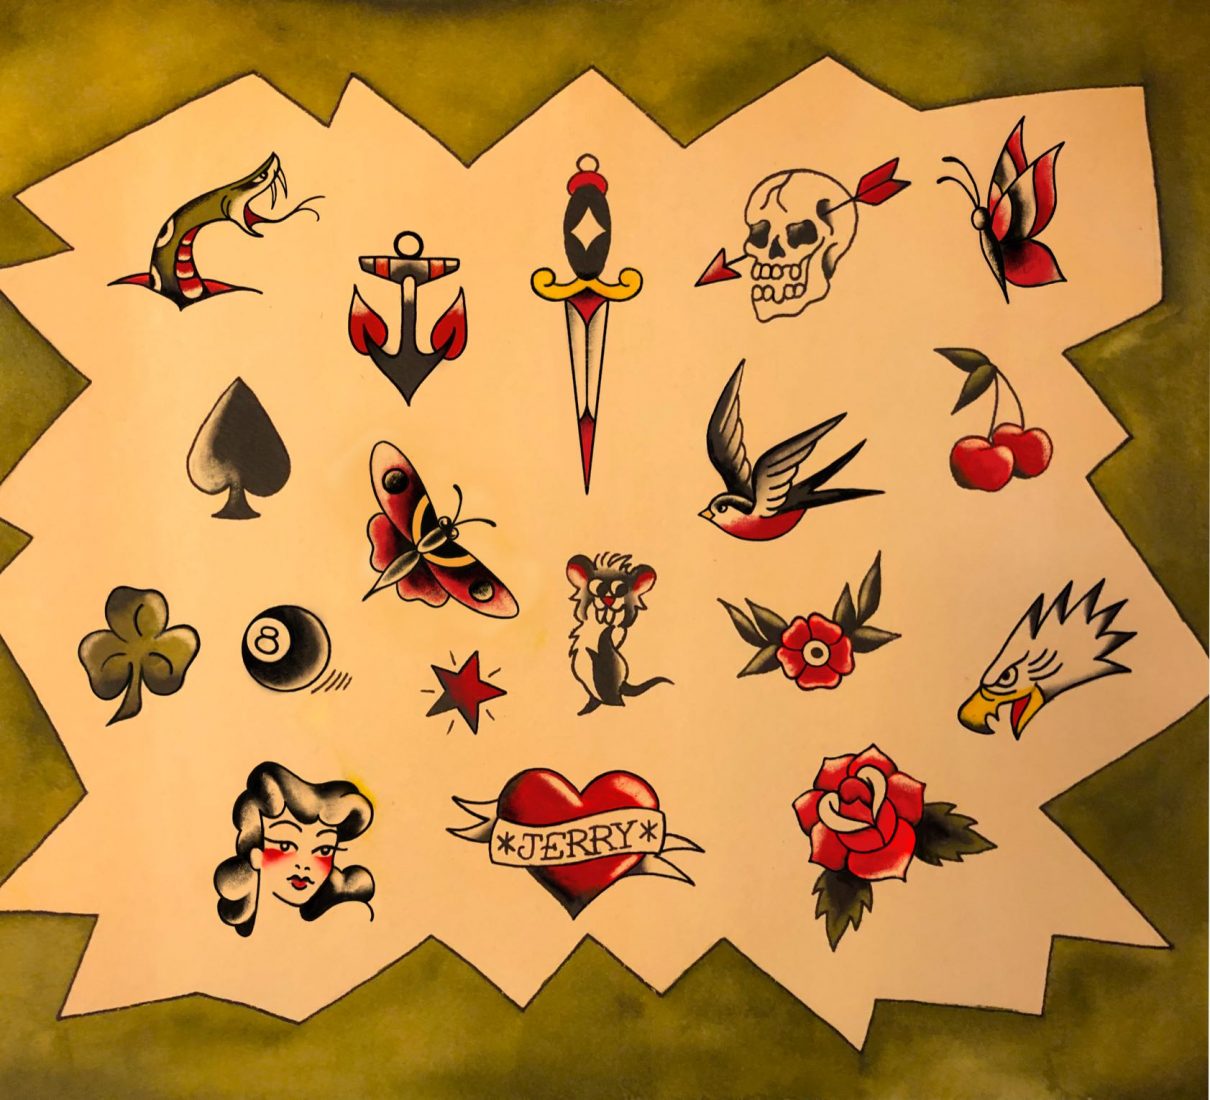 Get a “Sailor Jerry” Tattoo at Daredevil Tattoo Museum on January 14